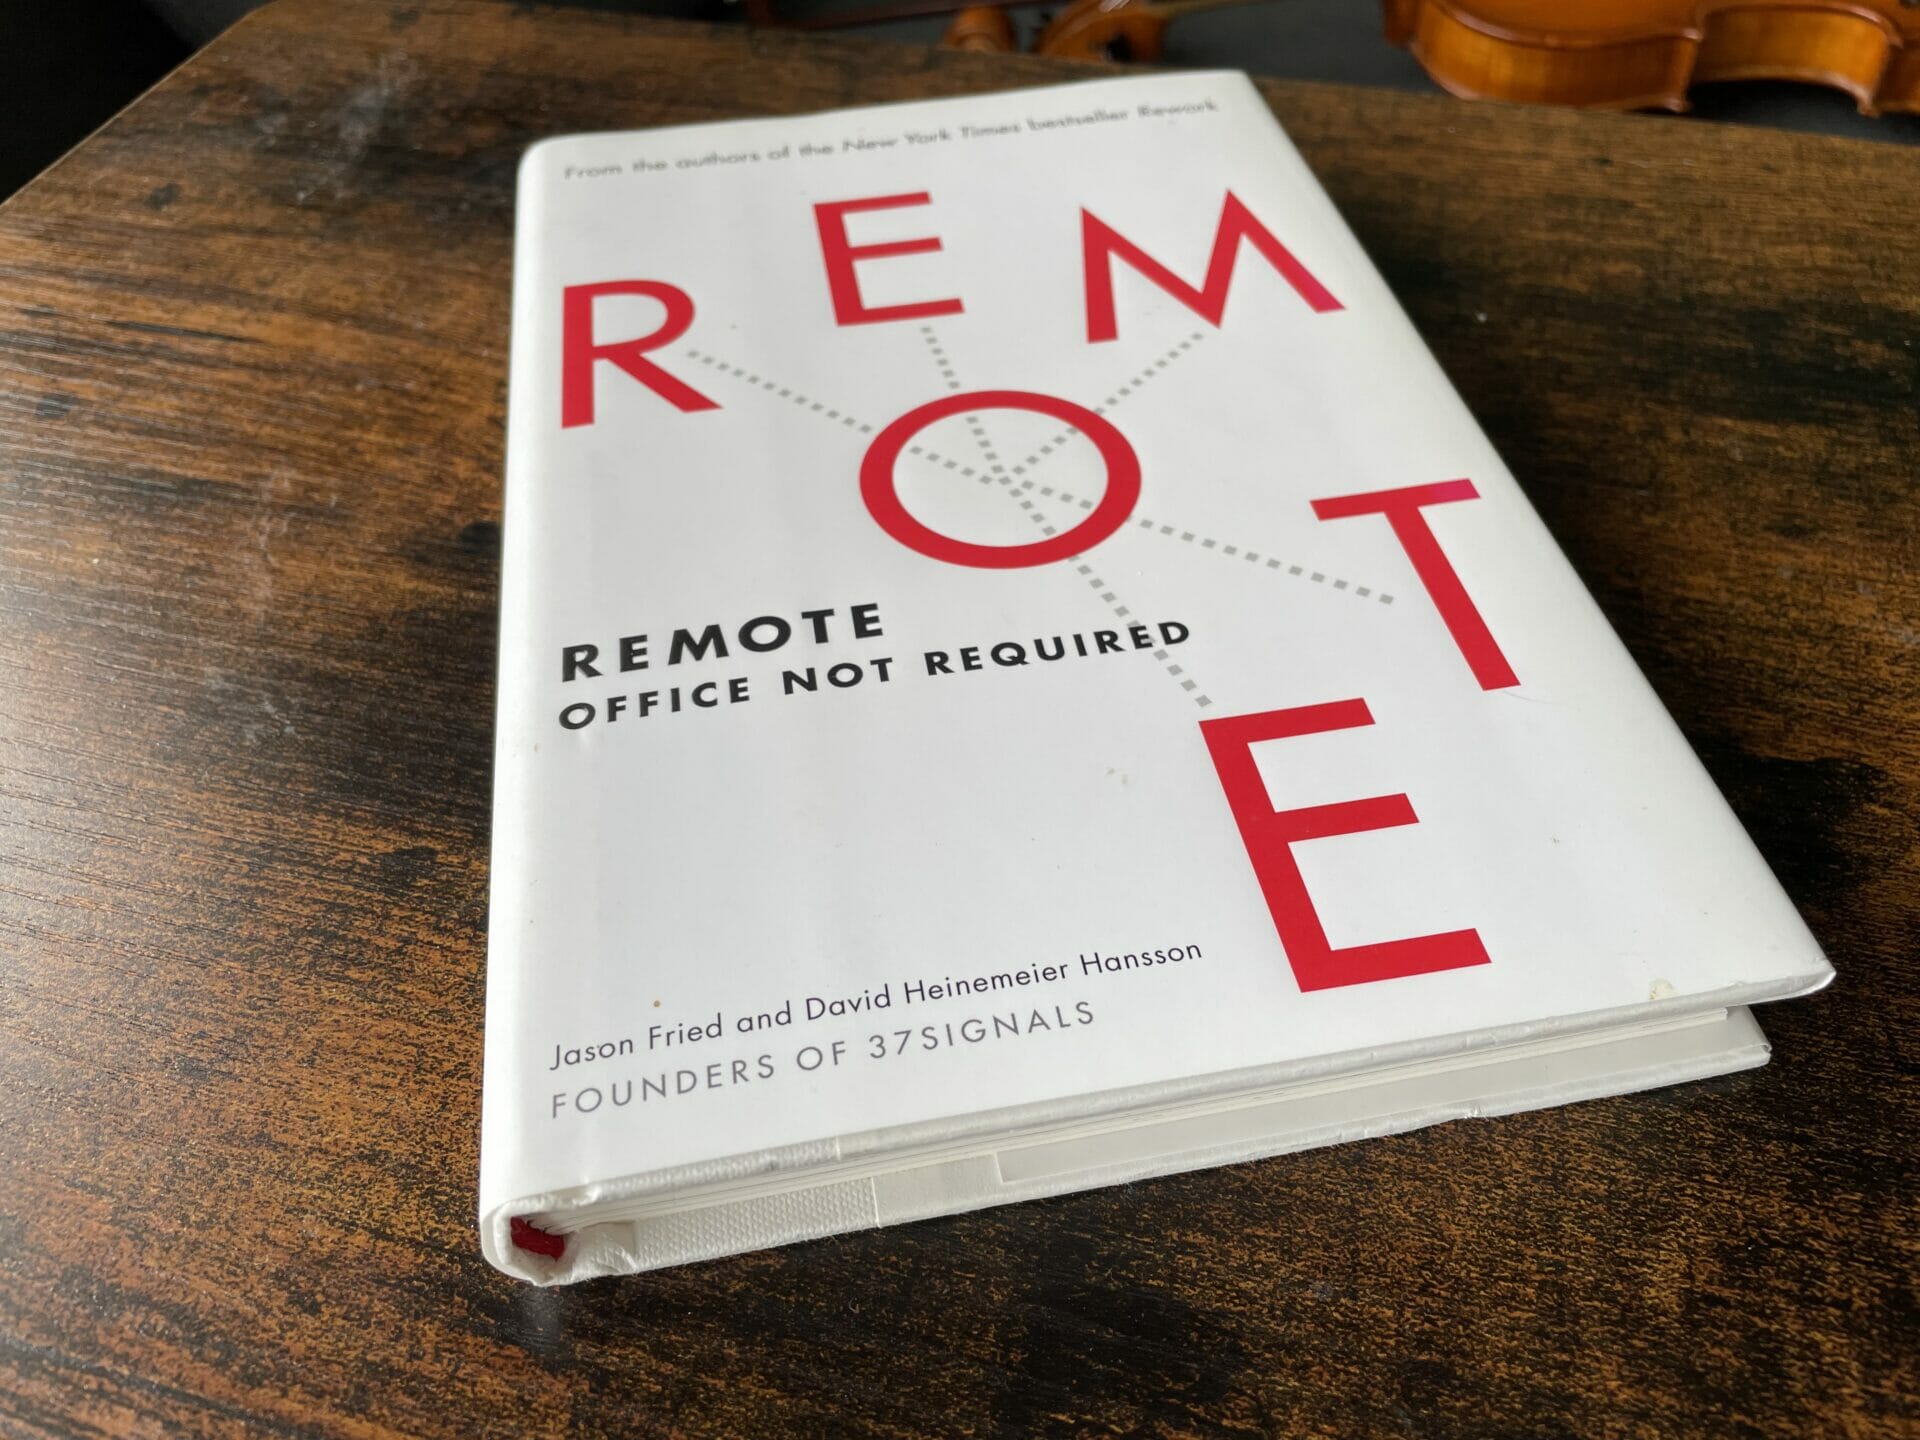 Four Takeaways from rereading Remote: Office Not Required